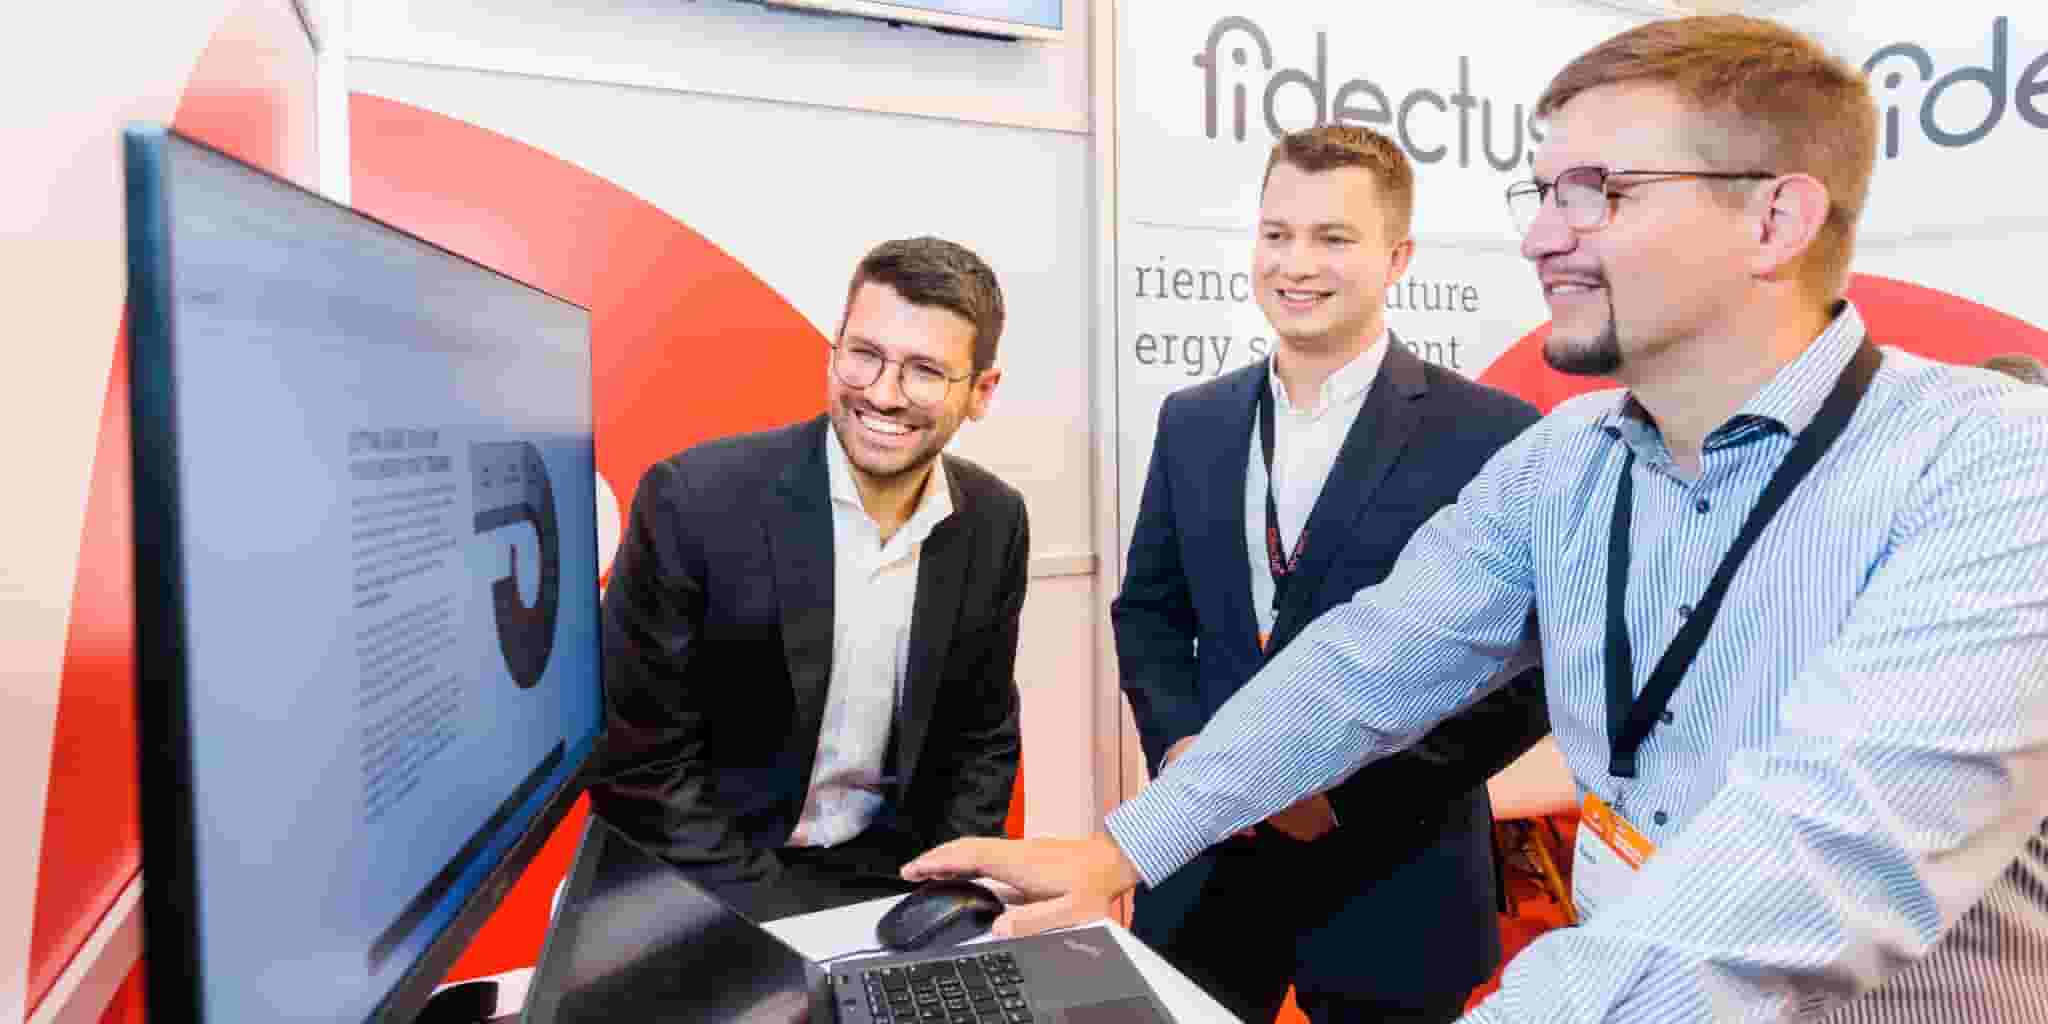 Fidectus booth at E-world 2022 event